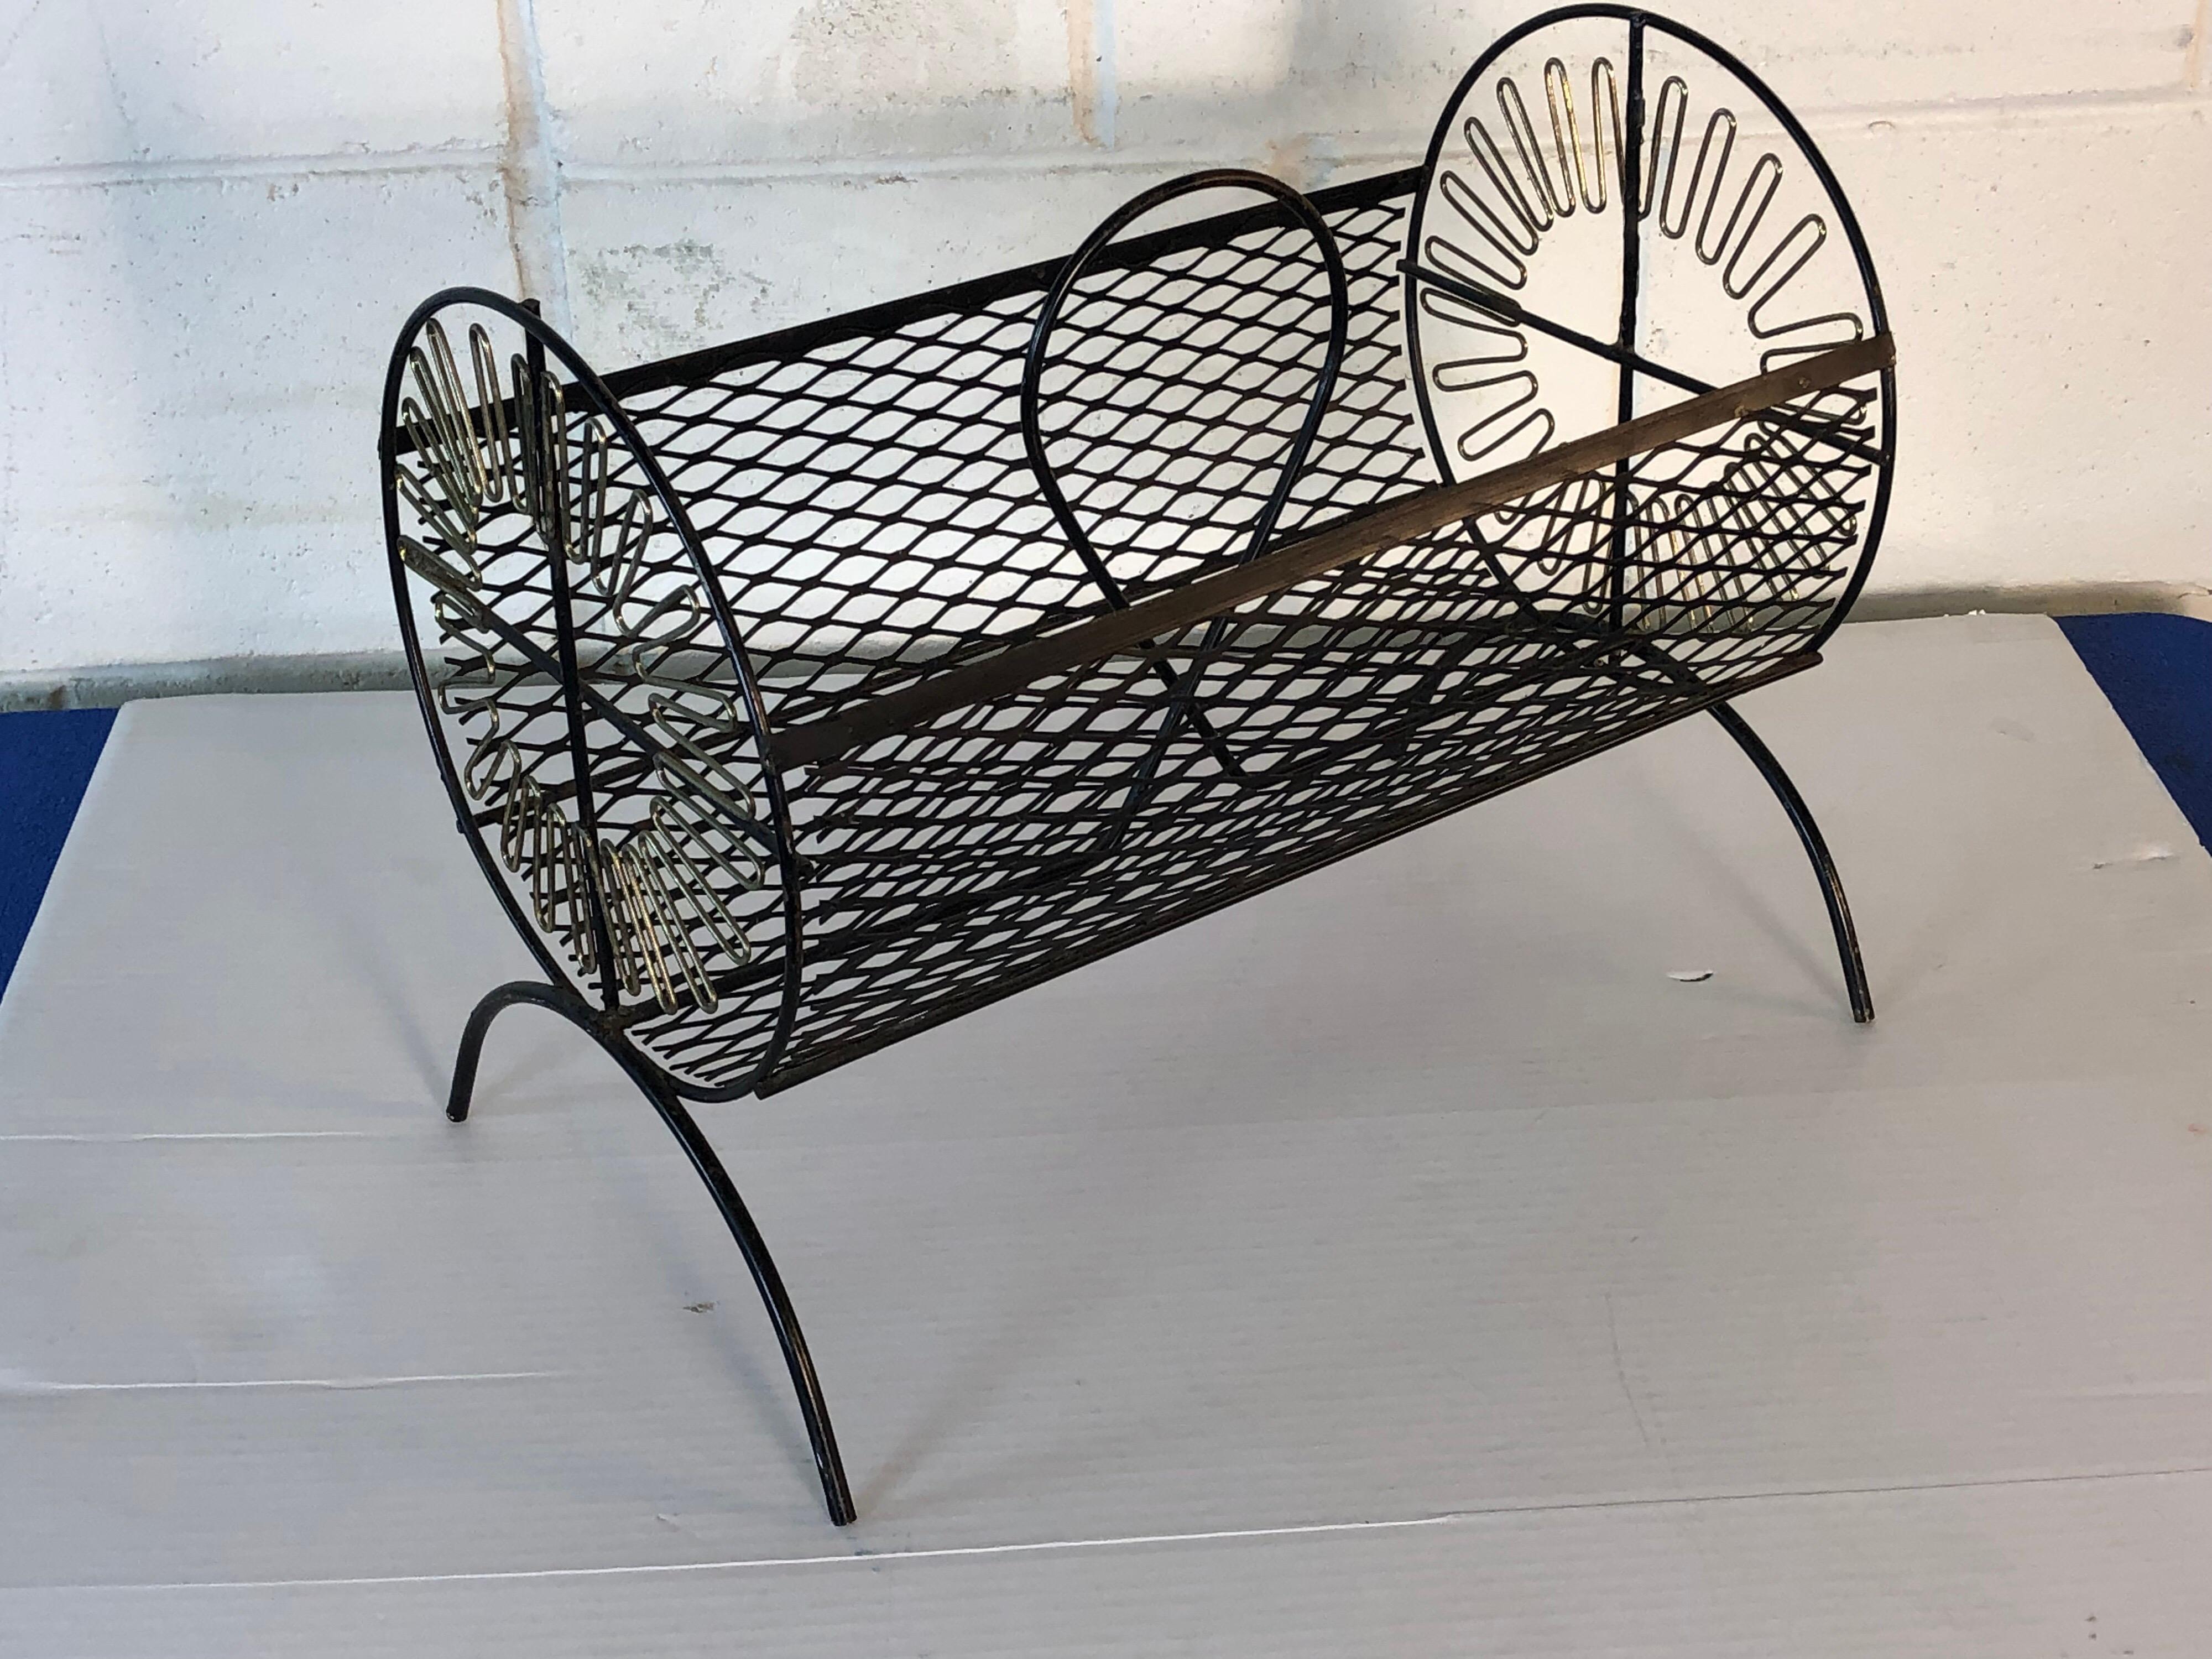 Vintage 1960s round black wire magazine rack with gold atomic metal accents on the ends. Magazine rack is in original condition with light wear from age and use. No marks.